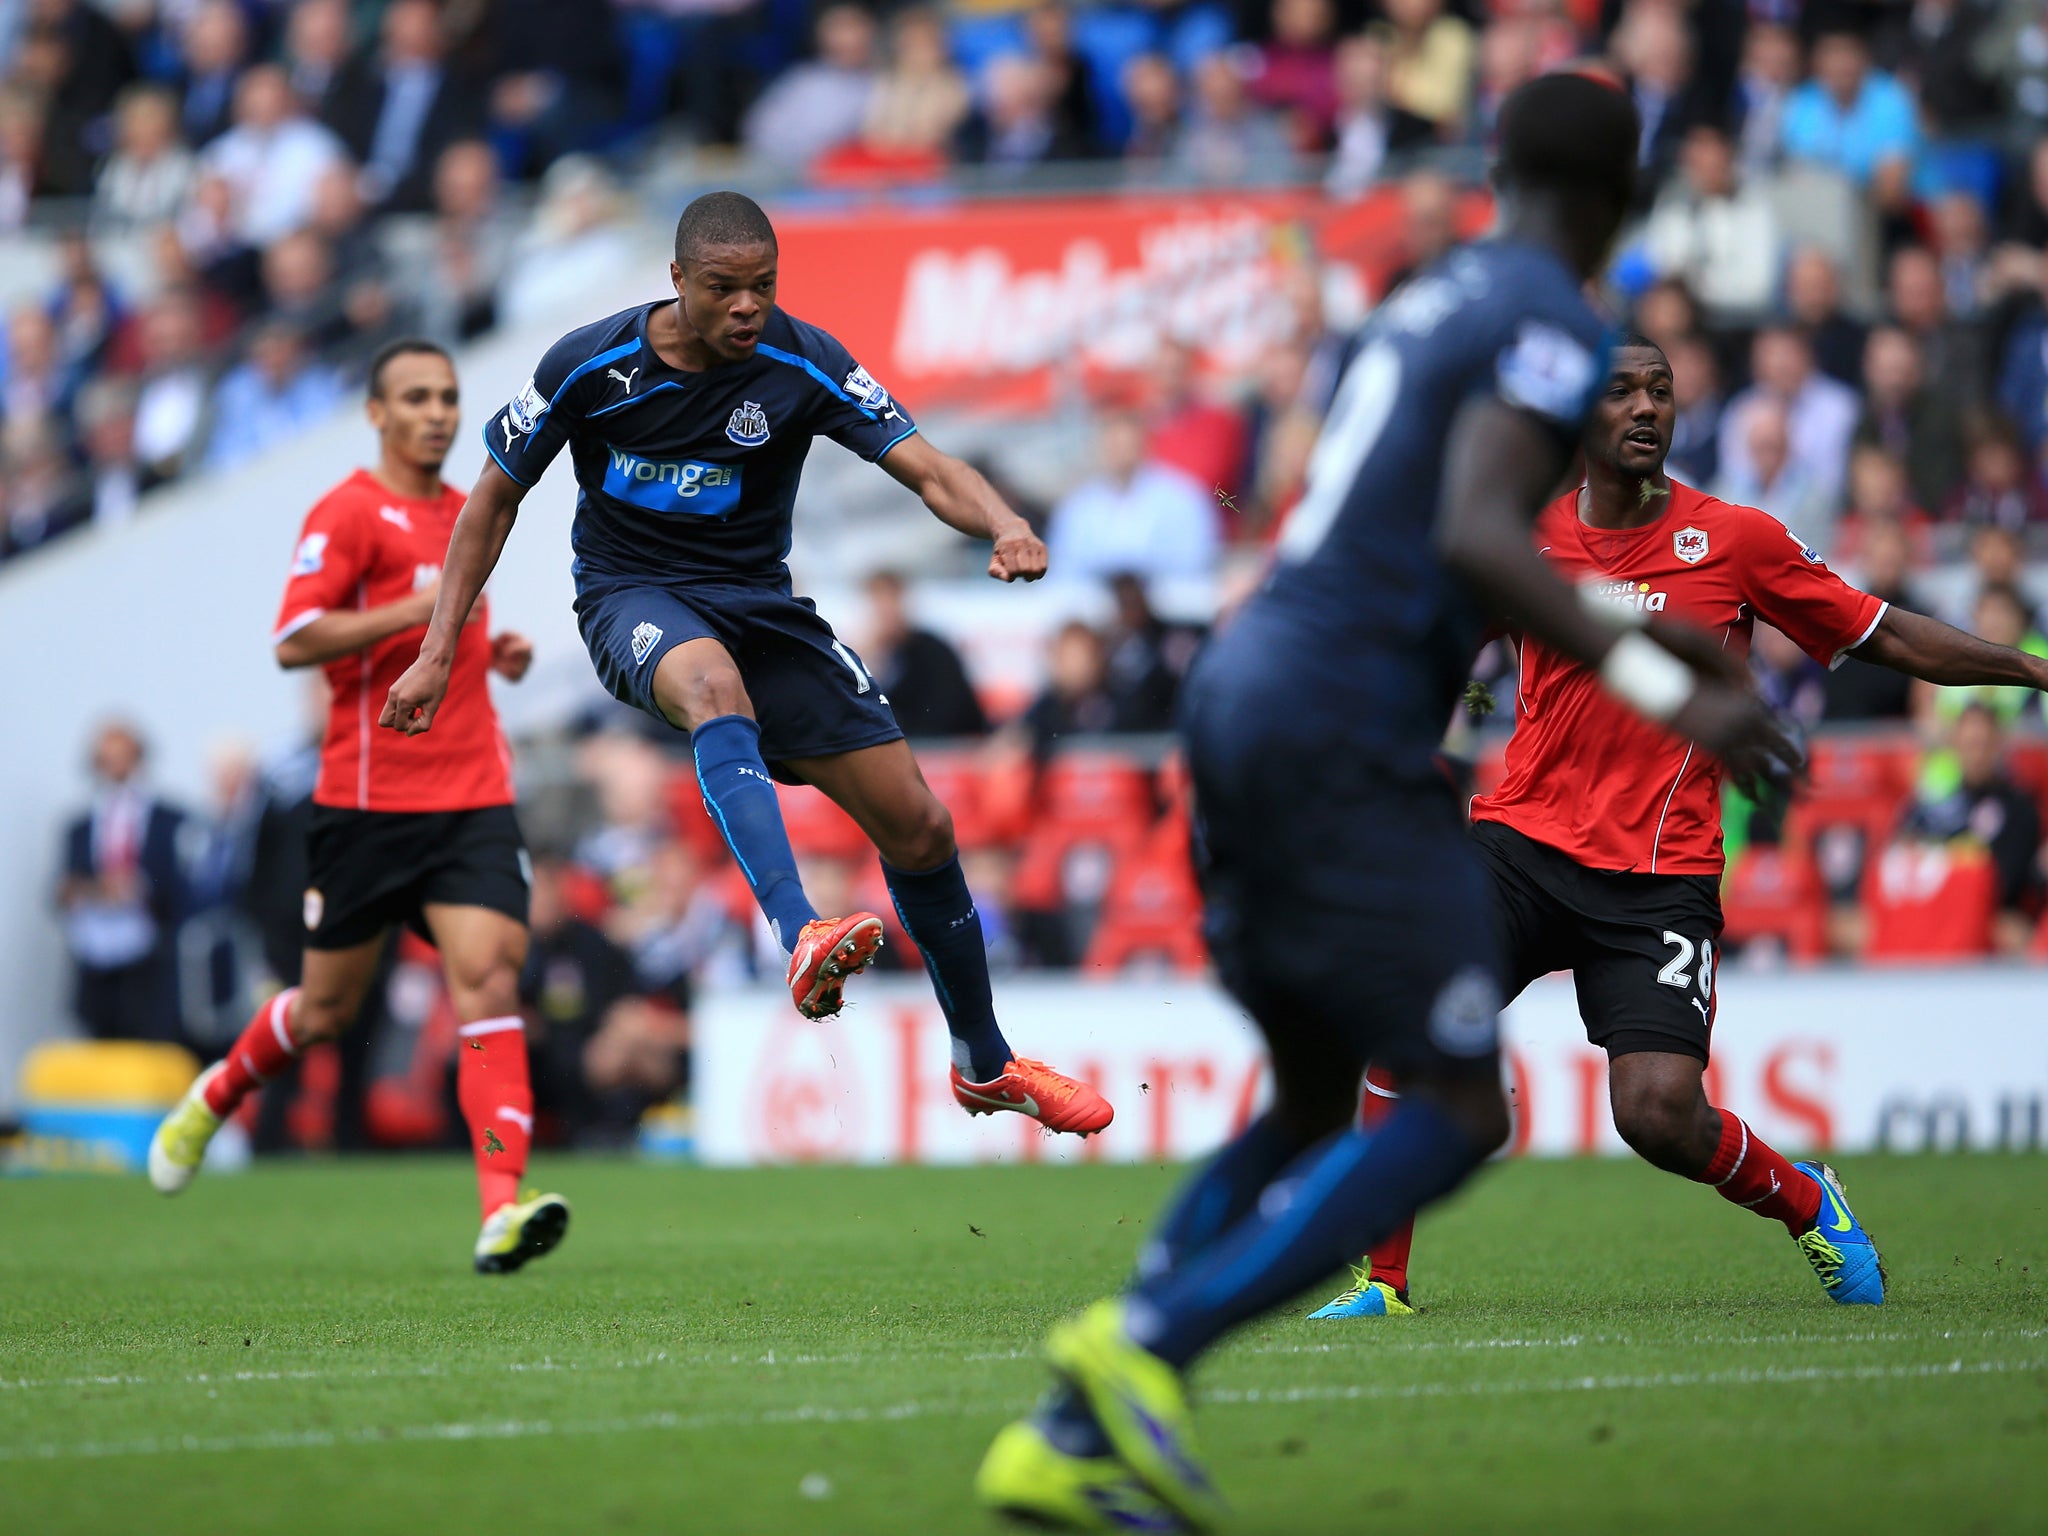 Loic Remy has been on fire for Newcastle